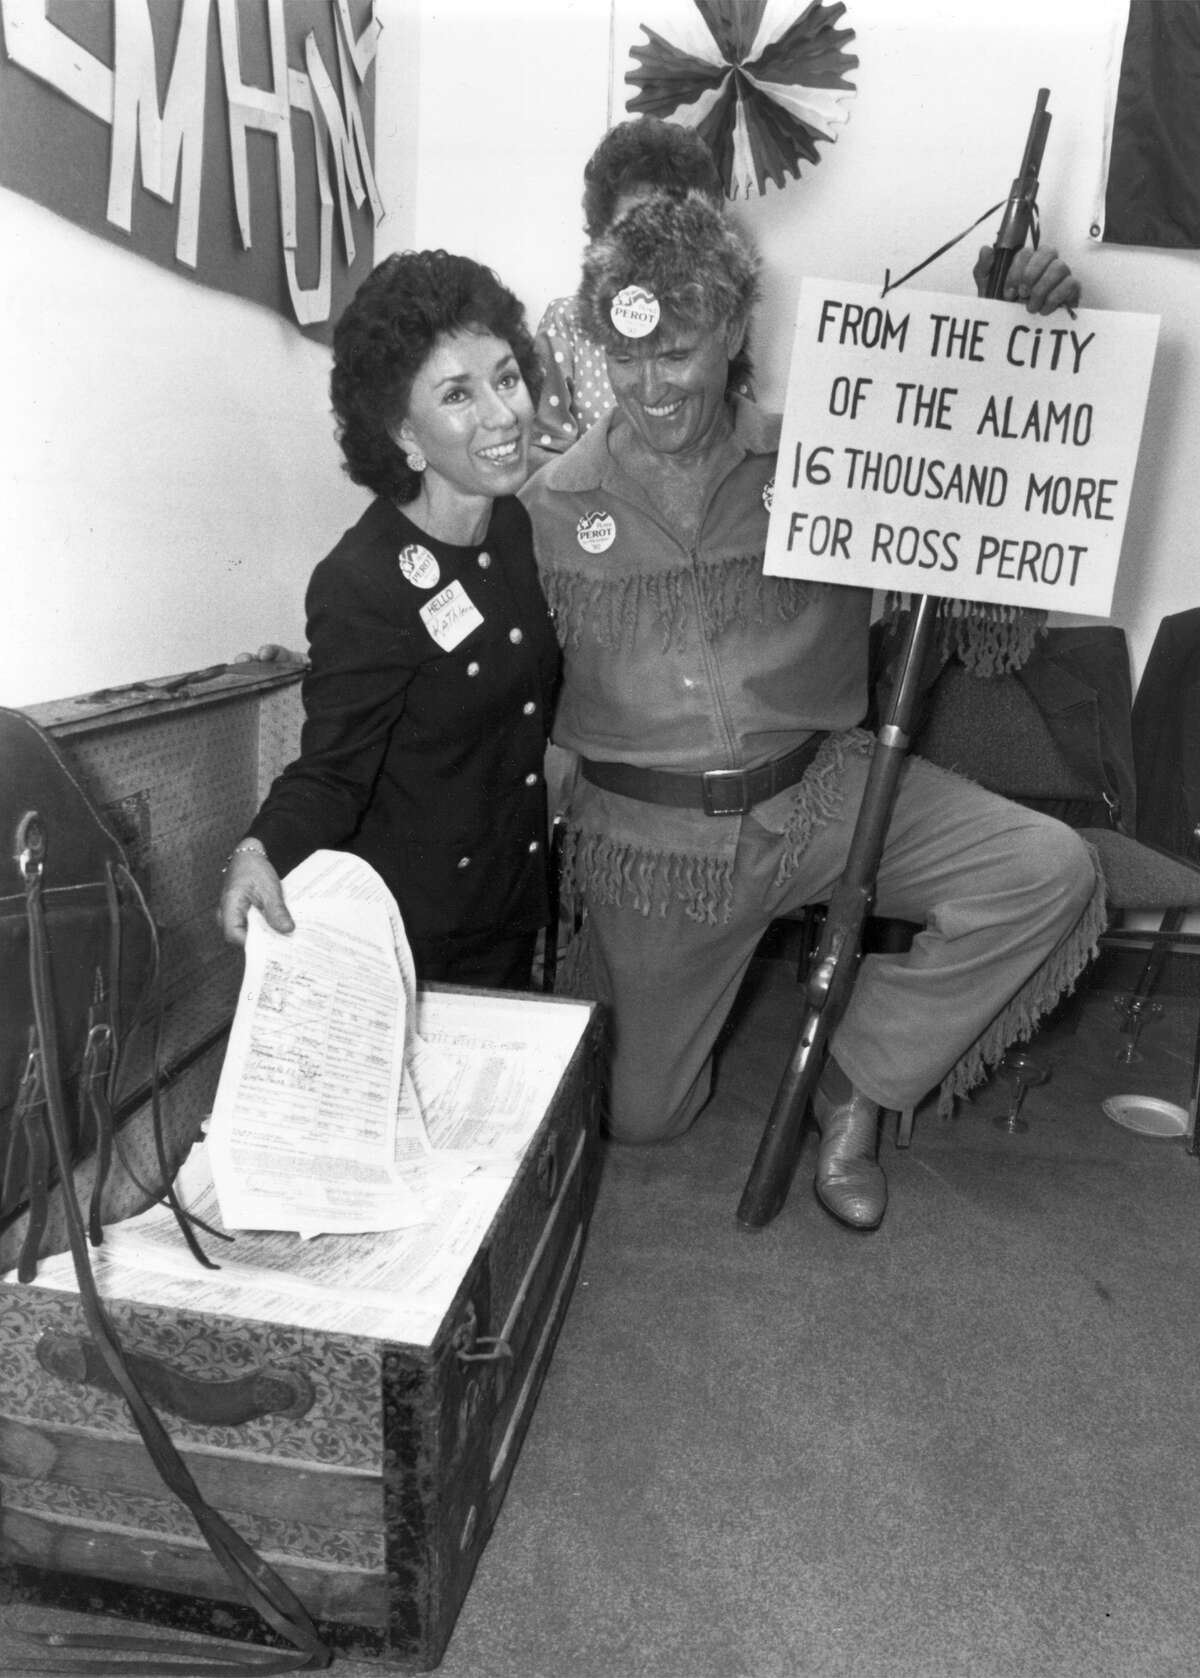 Then and Now 102702 - FILE - cutline: Local Ross Perot supporters Kathleen Carter and A.J. Myers pose with petitions bearing 16,000 signatures to put Perot on the presidential ballot in Texas, in this 1992 file photo. Today, Carter is chairwoman of the Alamo Committee of the Daughters of the Republic of Texas, the group entrusted by the state to care for the Alamo. Kathleen Carter and A.J. Myers with the Perot petitions as they were being packed to be transported to Dallas. Petitions to put Ross Perot on the Ballot as a presidential candidate. May 1 , 1992 photo by Jose Barrera / Staff